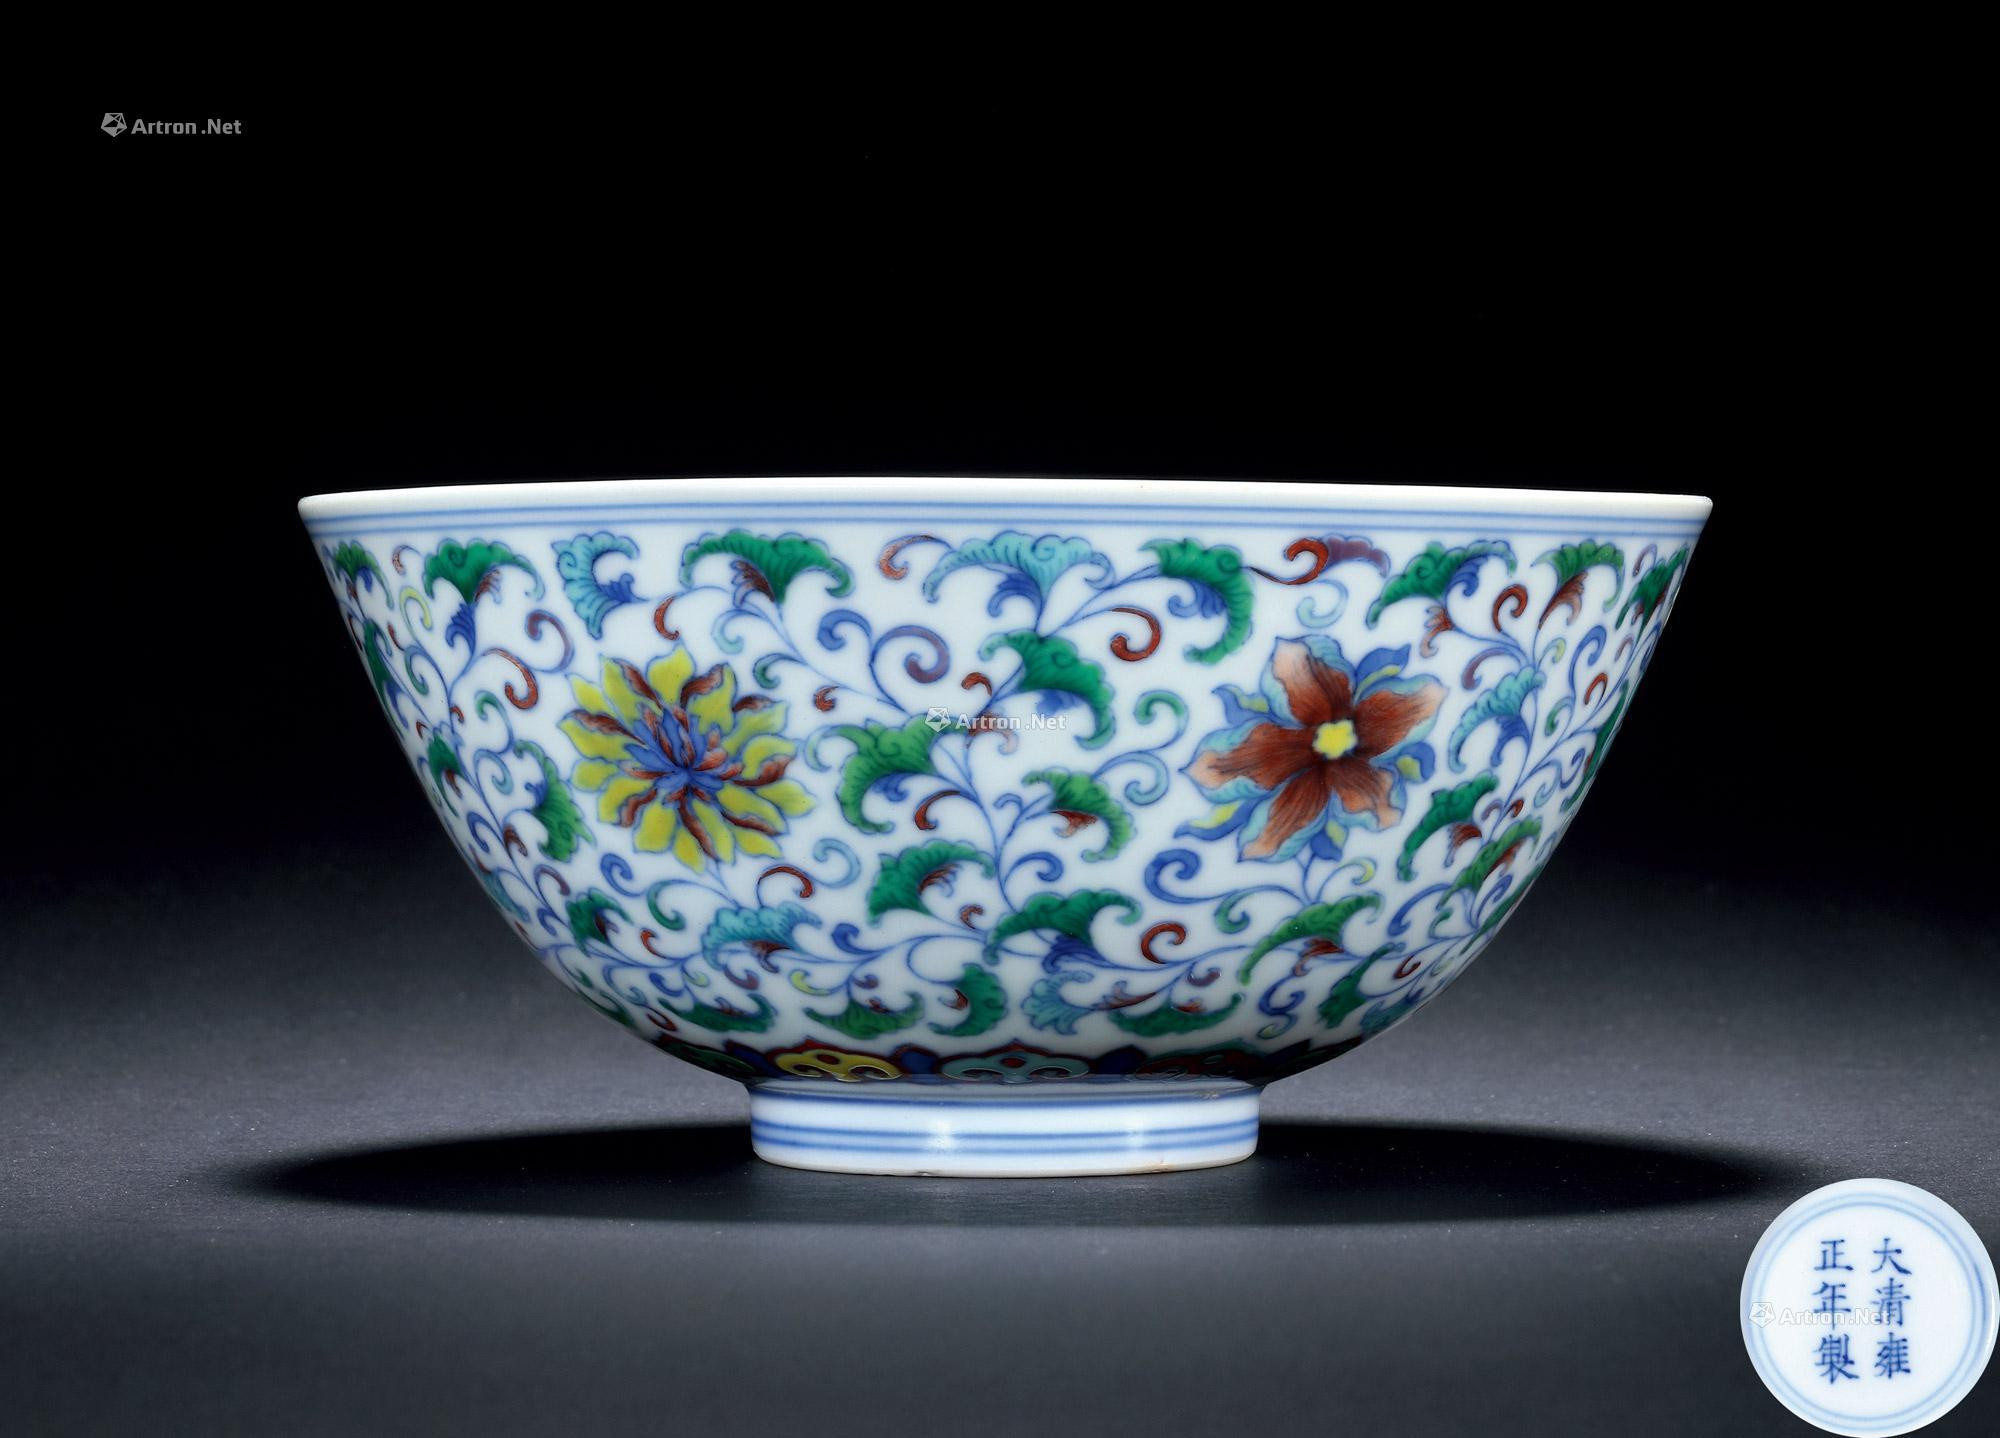 A CONTENDING COLORS BOWL WITH FLOWERS DESIGN